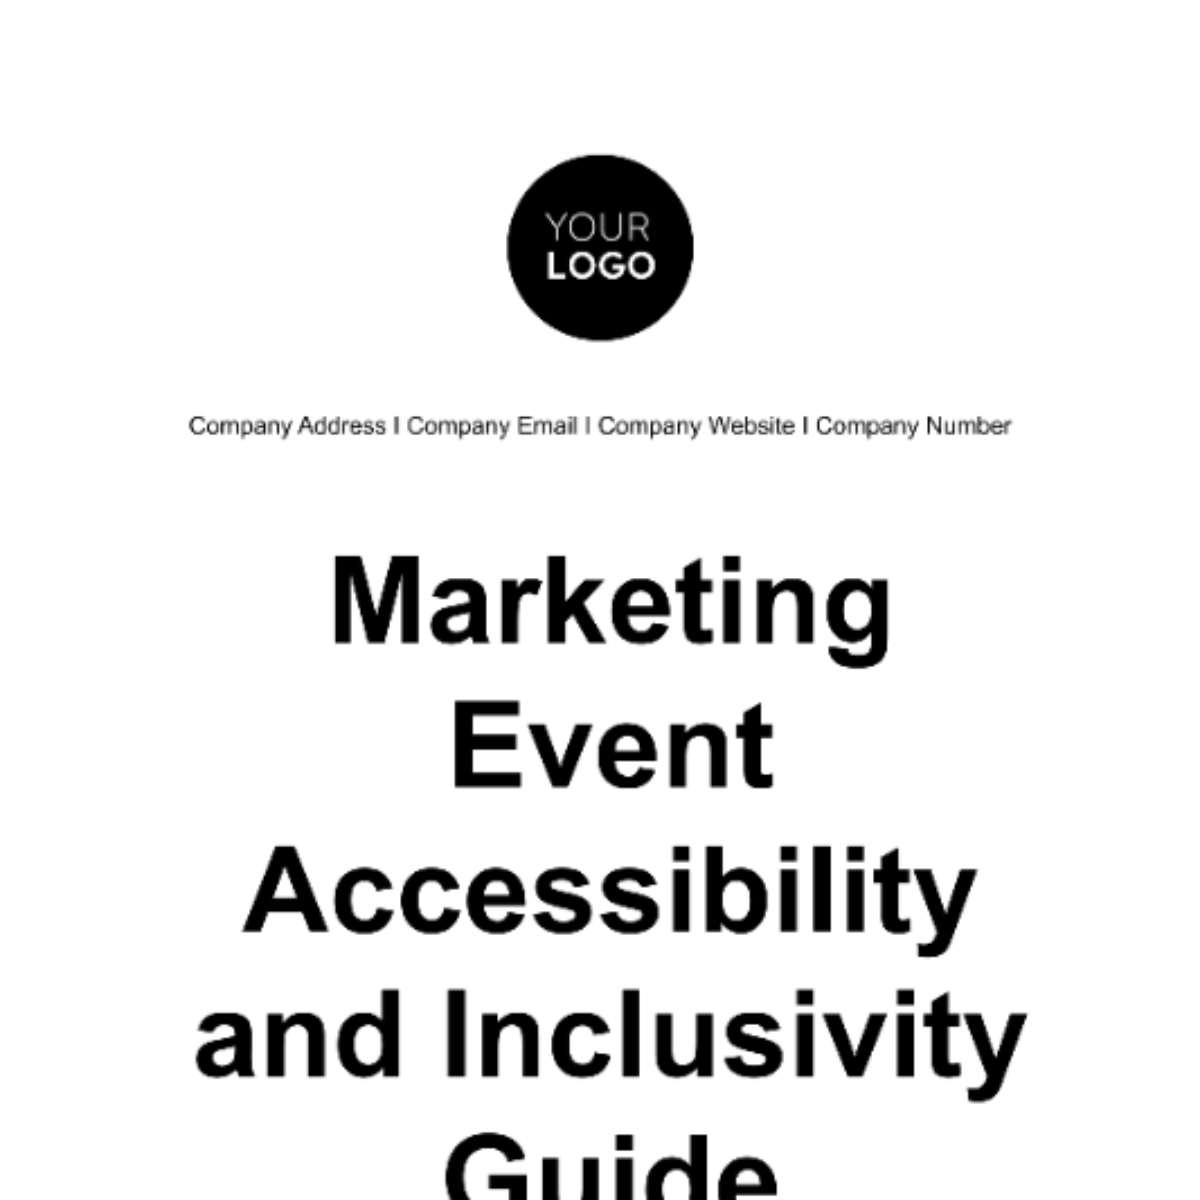 Marketing Event Accessibility and Inclusivity Guide Template